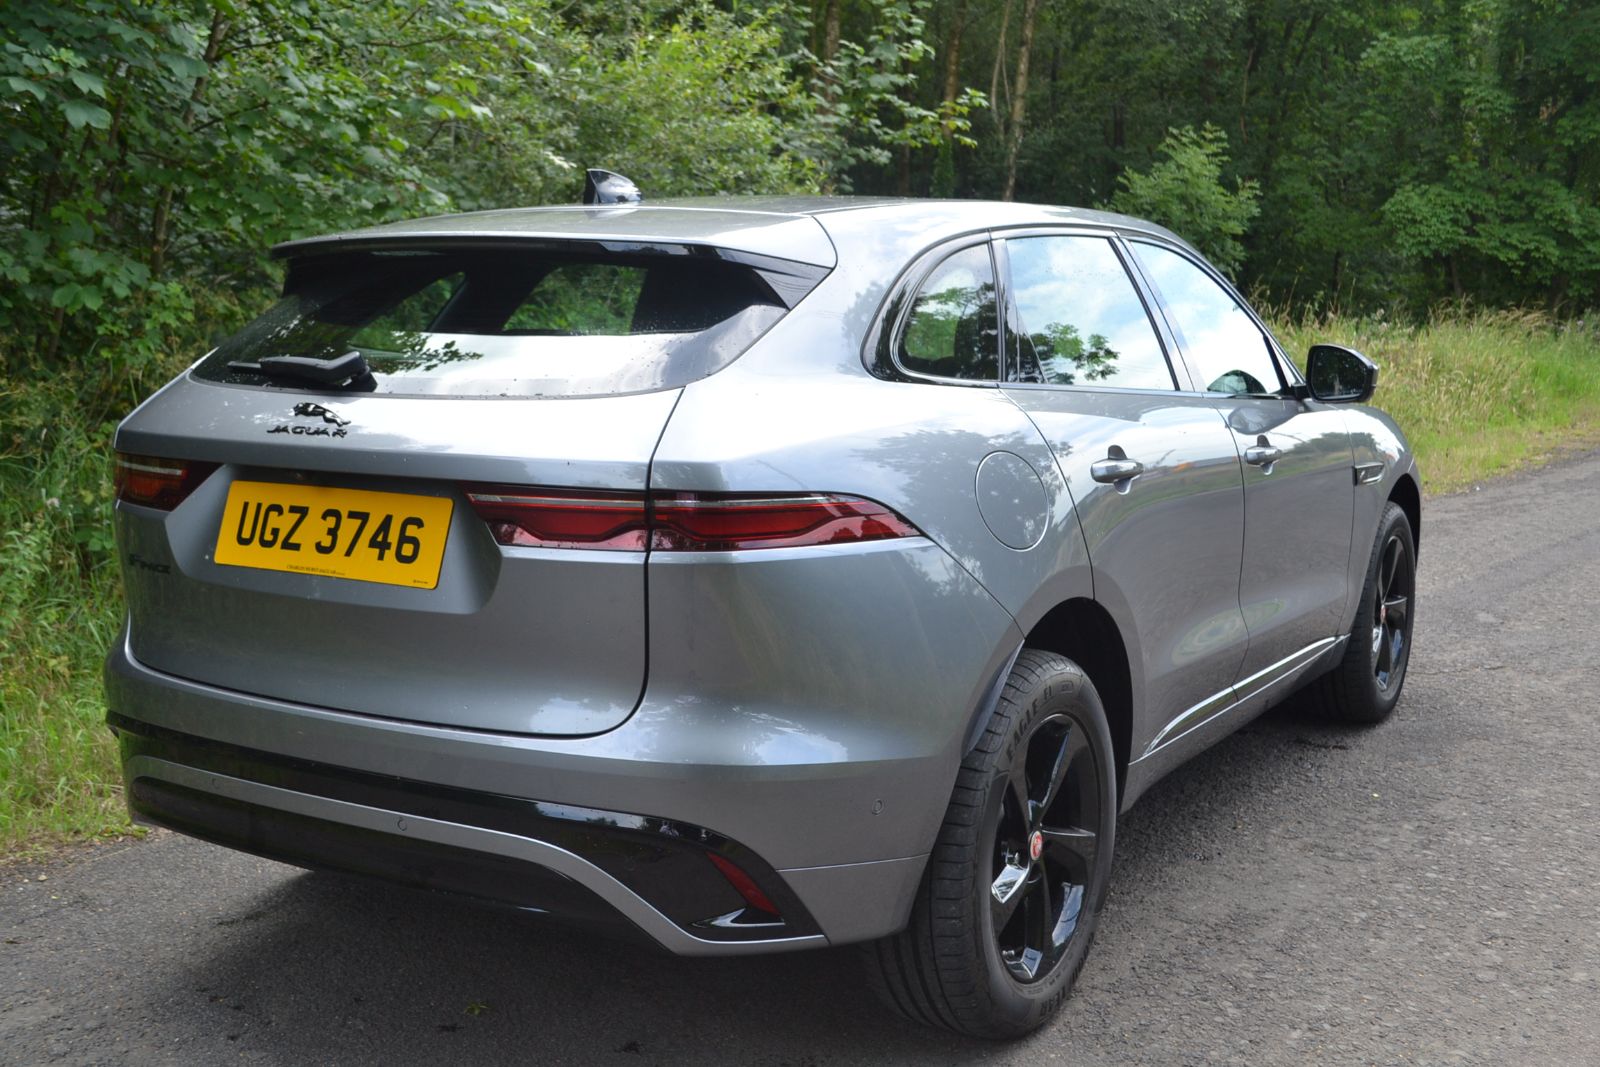 Jaguar F-PACE RDYNAMIC S D MHEV AWD A for sale Northern Ireland